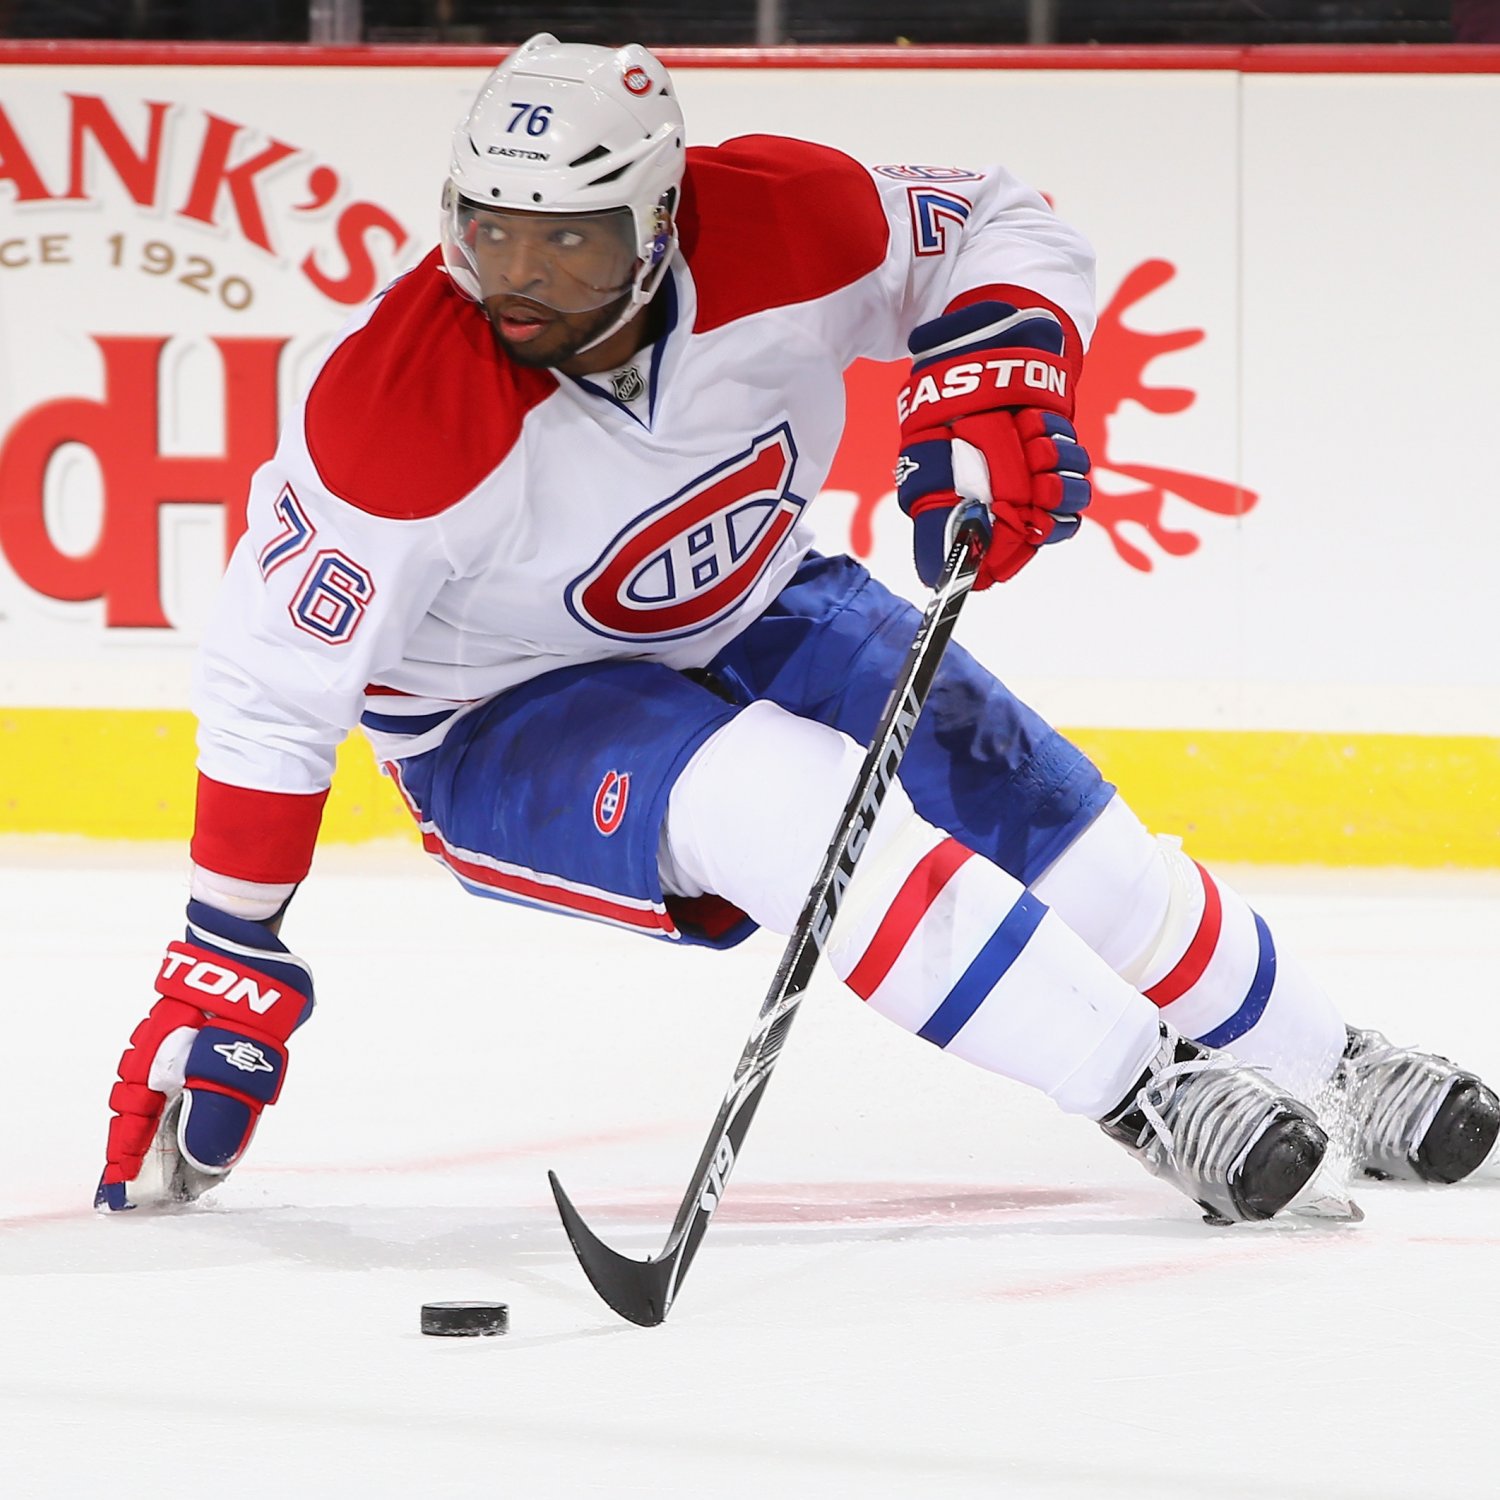 hi-res-454018379-subban-of-the-montreal-canadiens-in-action-against-the_crop_exact